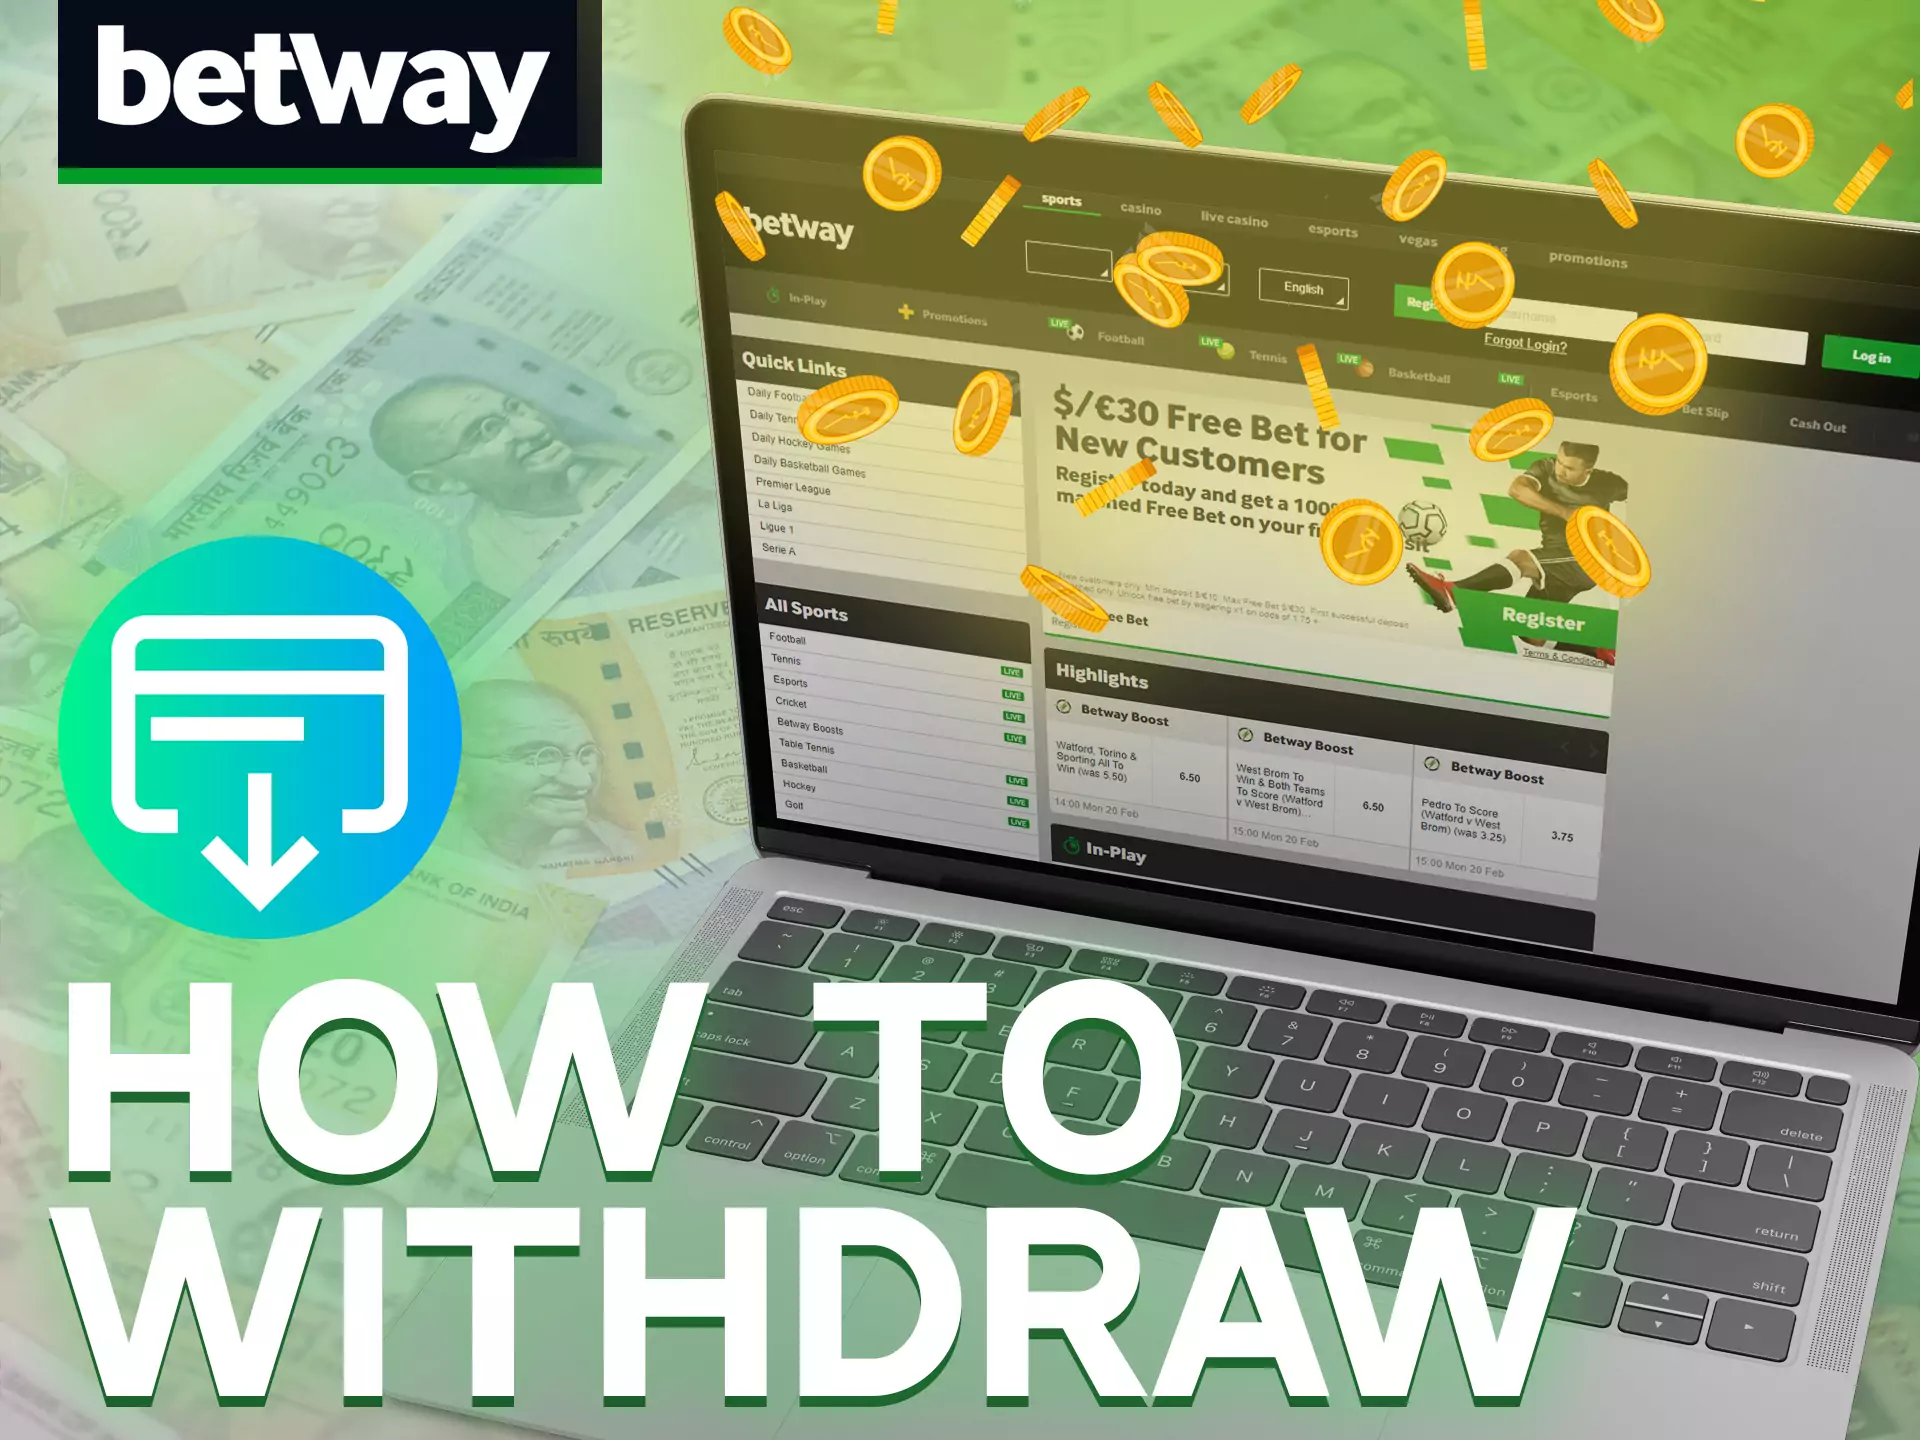 Withdraw money from Betway without any problems.